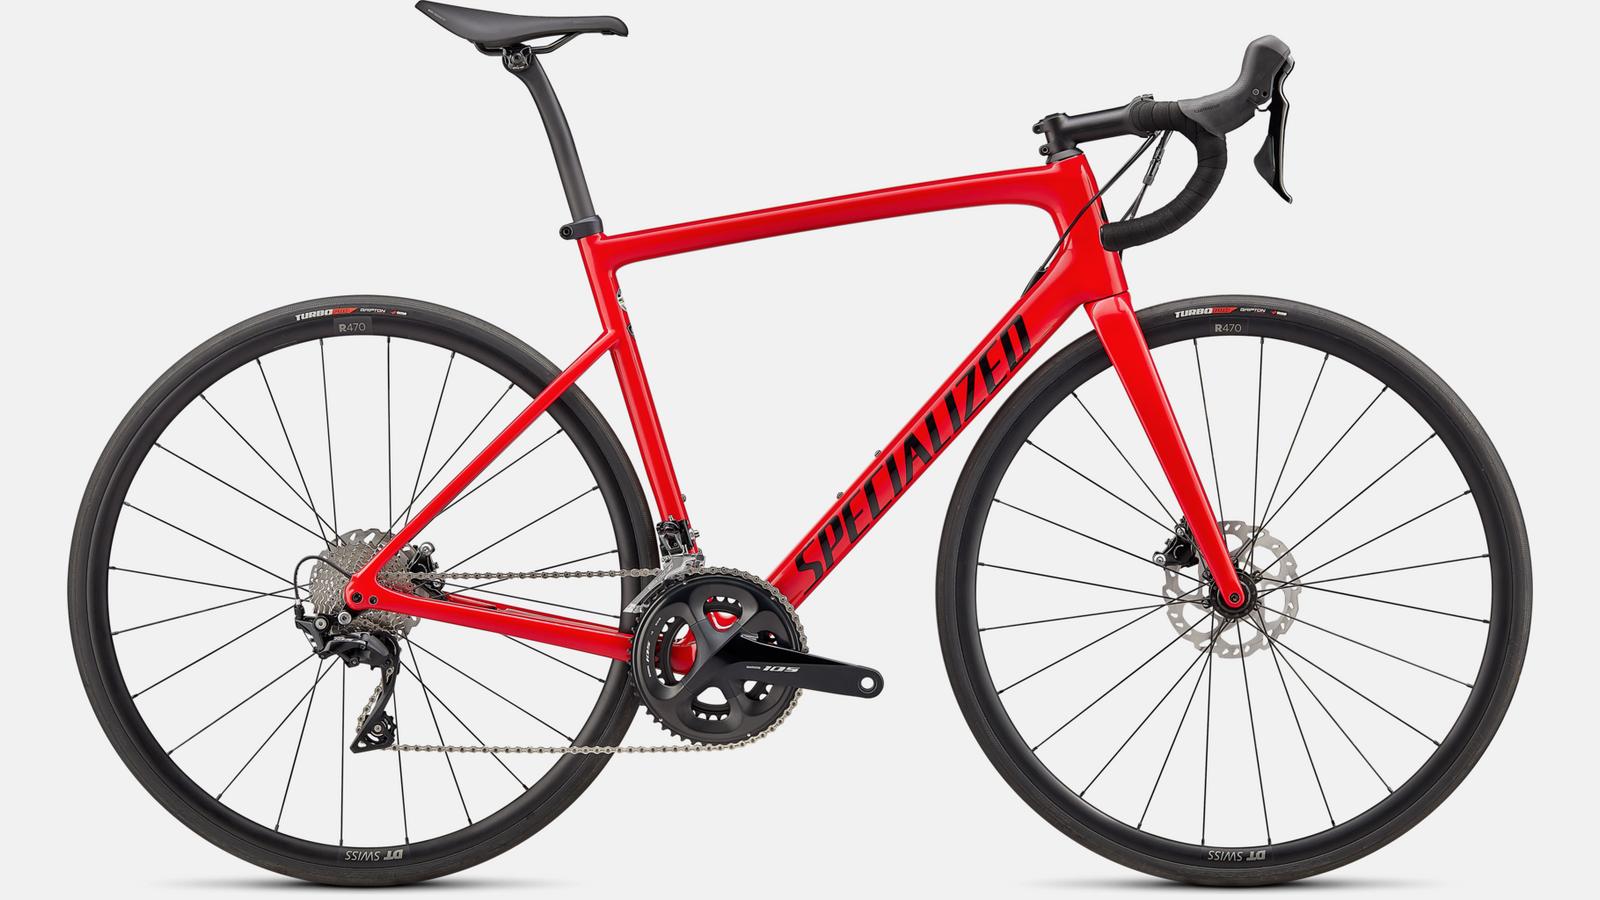 Paint for 2022 Specialized Tarmac SL6 Sport - Gloss Flo Red